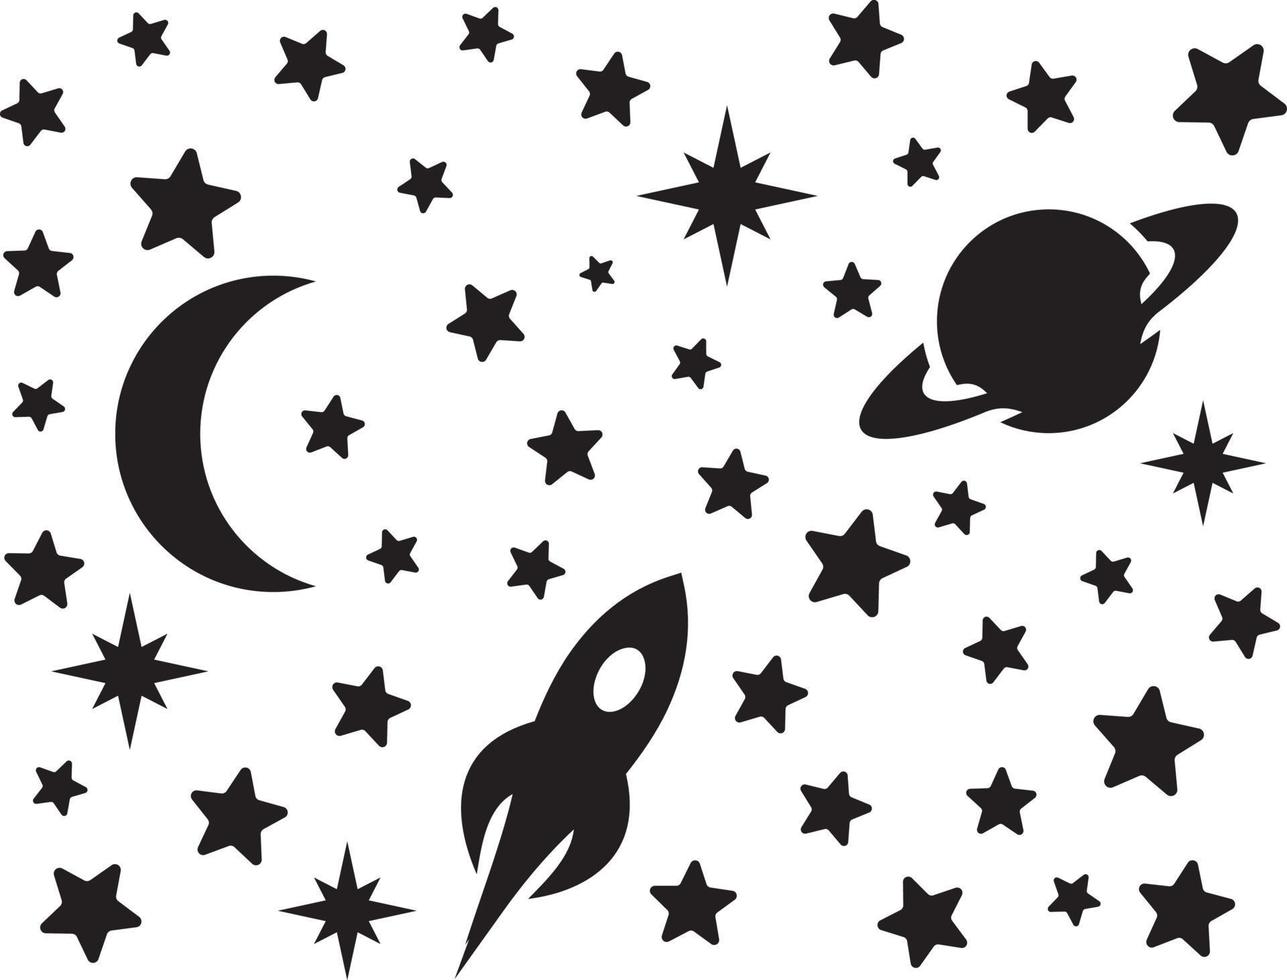 Stars, moon, planets and rocket silhouette vector